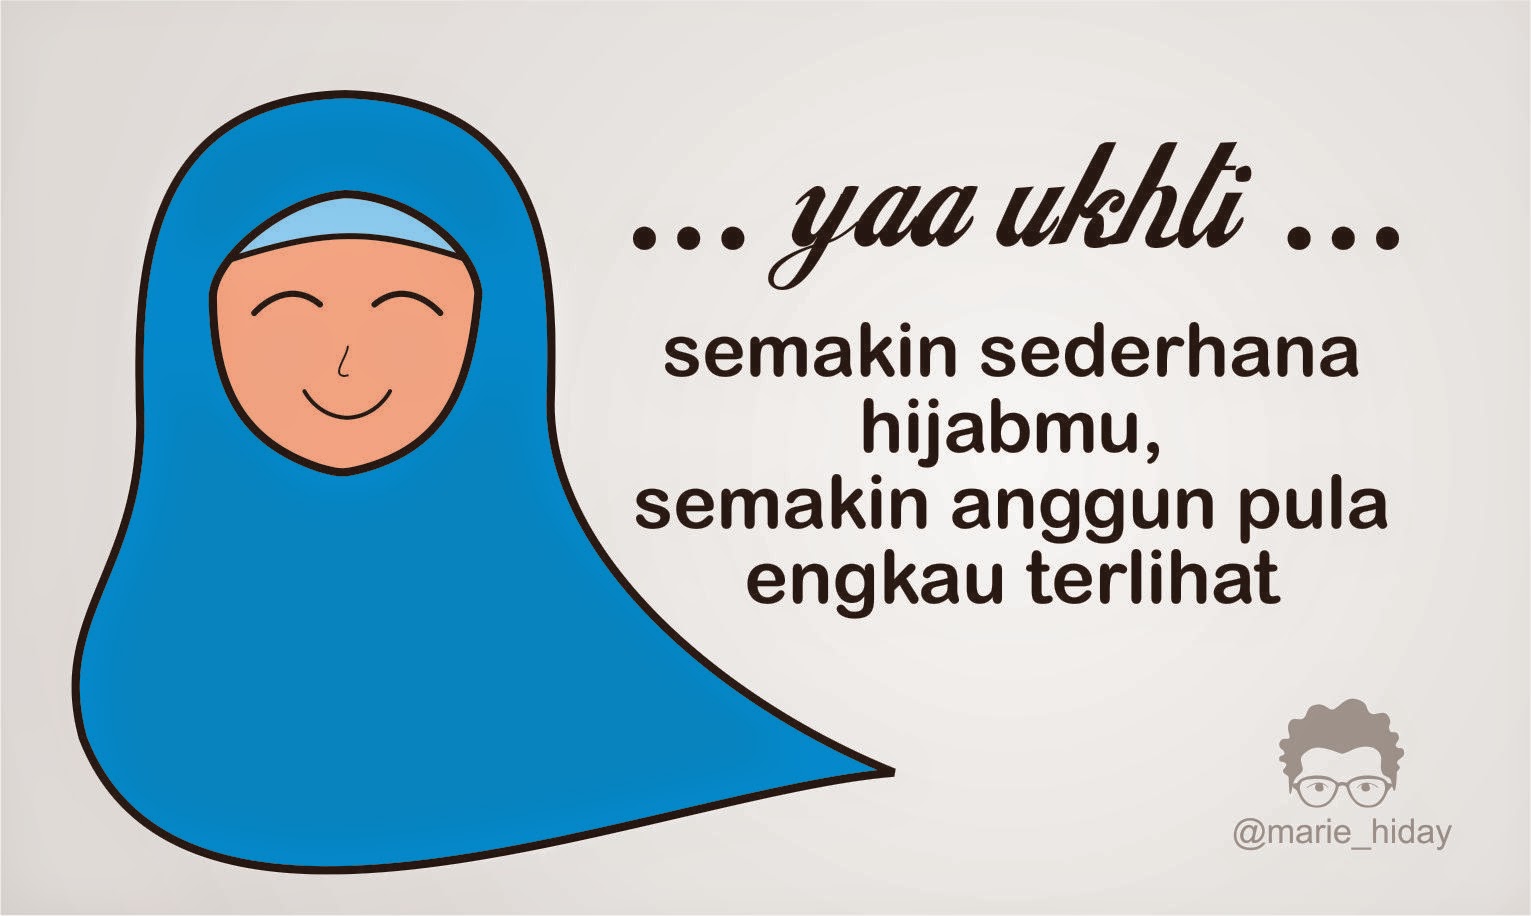 Design Vector Hijab Muslimah With Quote